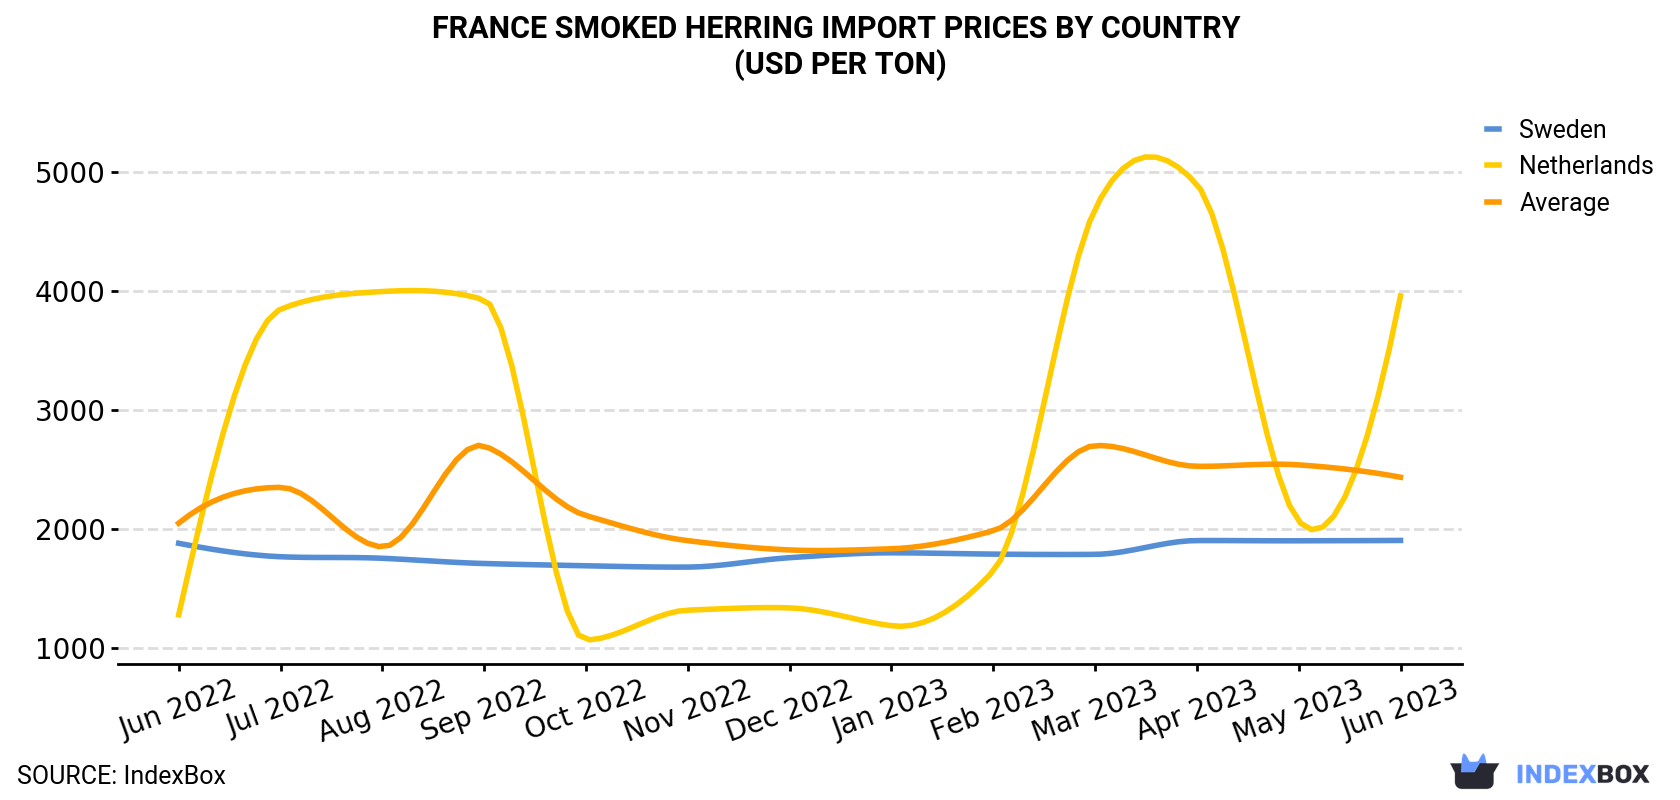 France Smoked Herring Import Prices By Country (USD Per Ton)